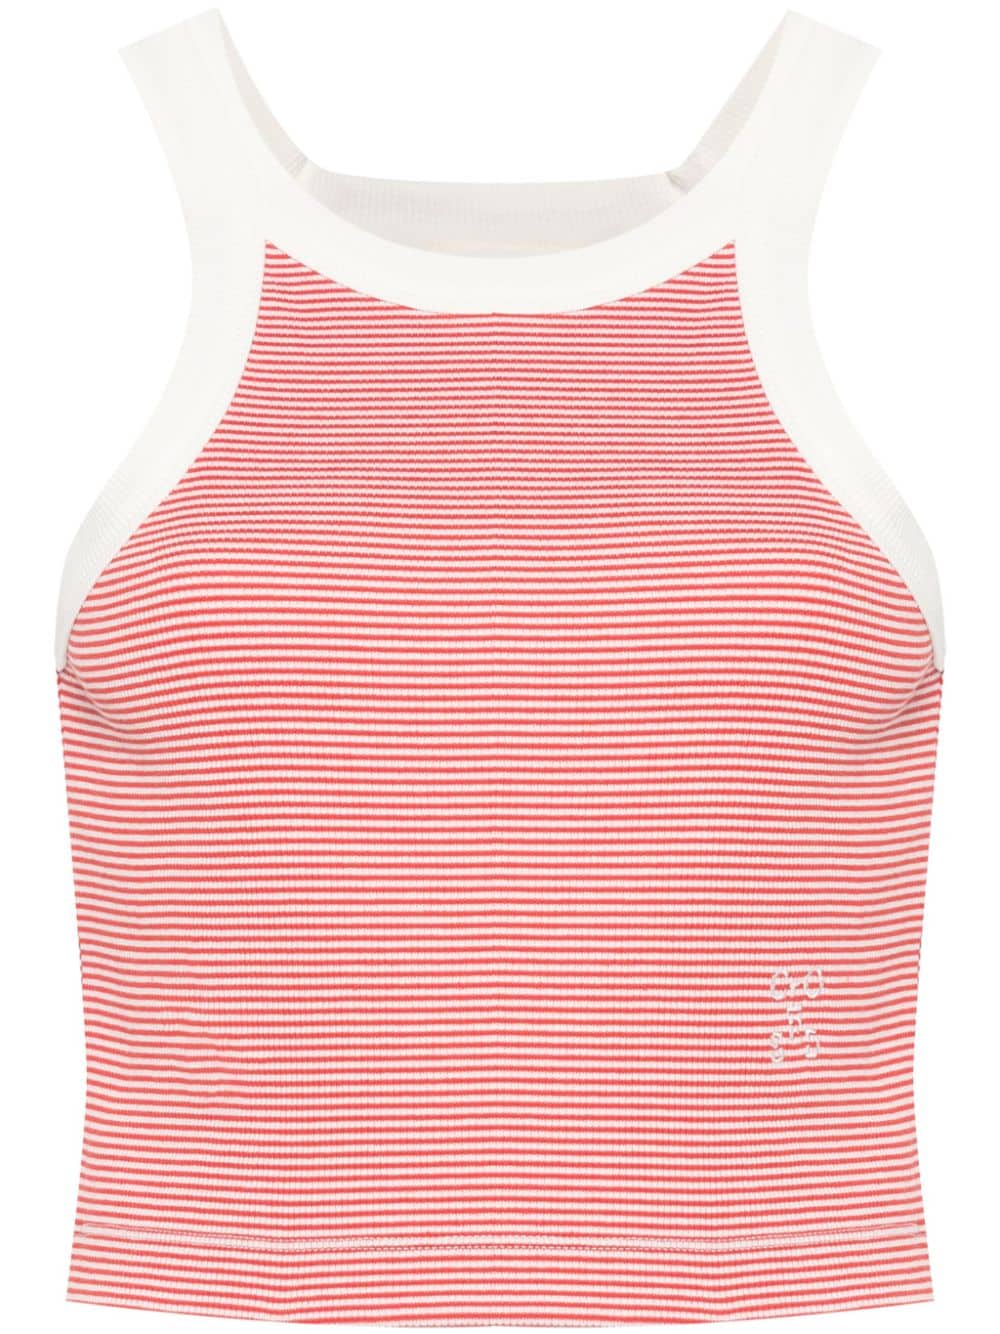 CLOSED CLOSED- Organic Cotton Cropped Tank Top